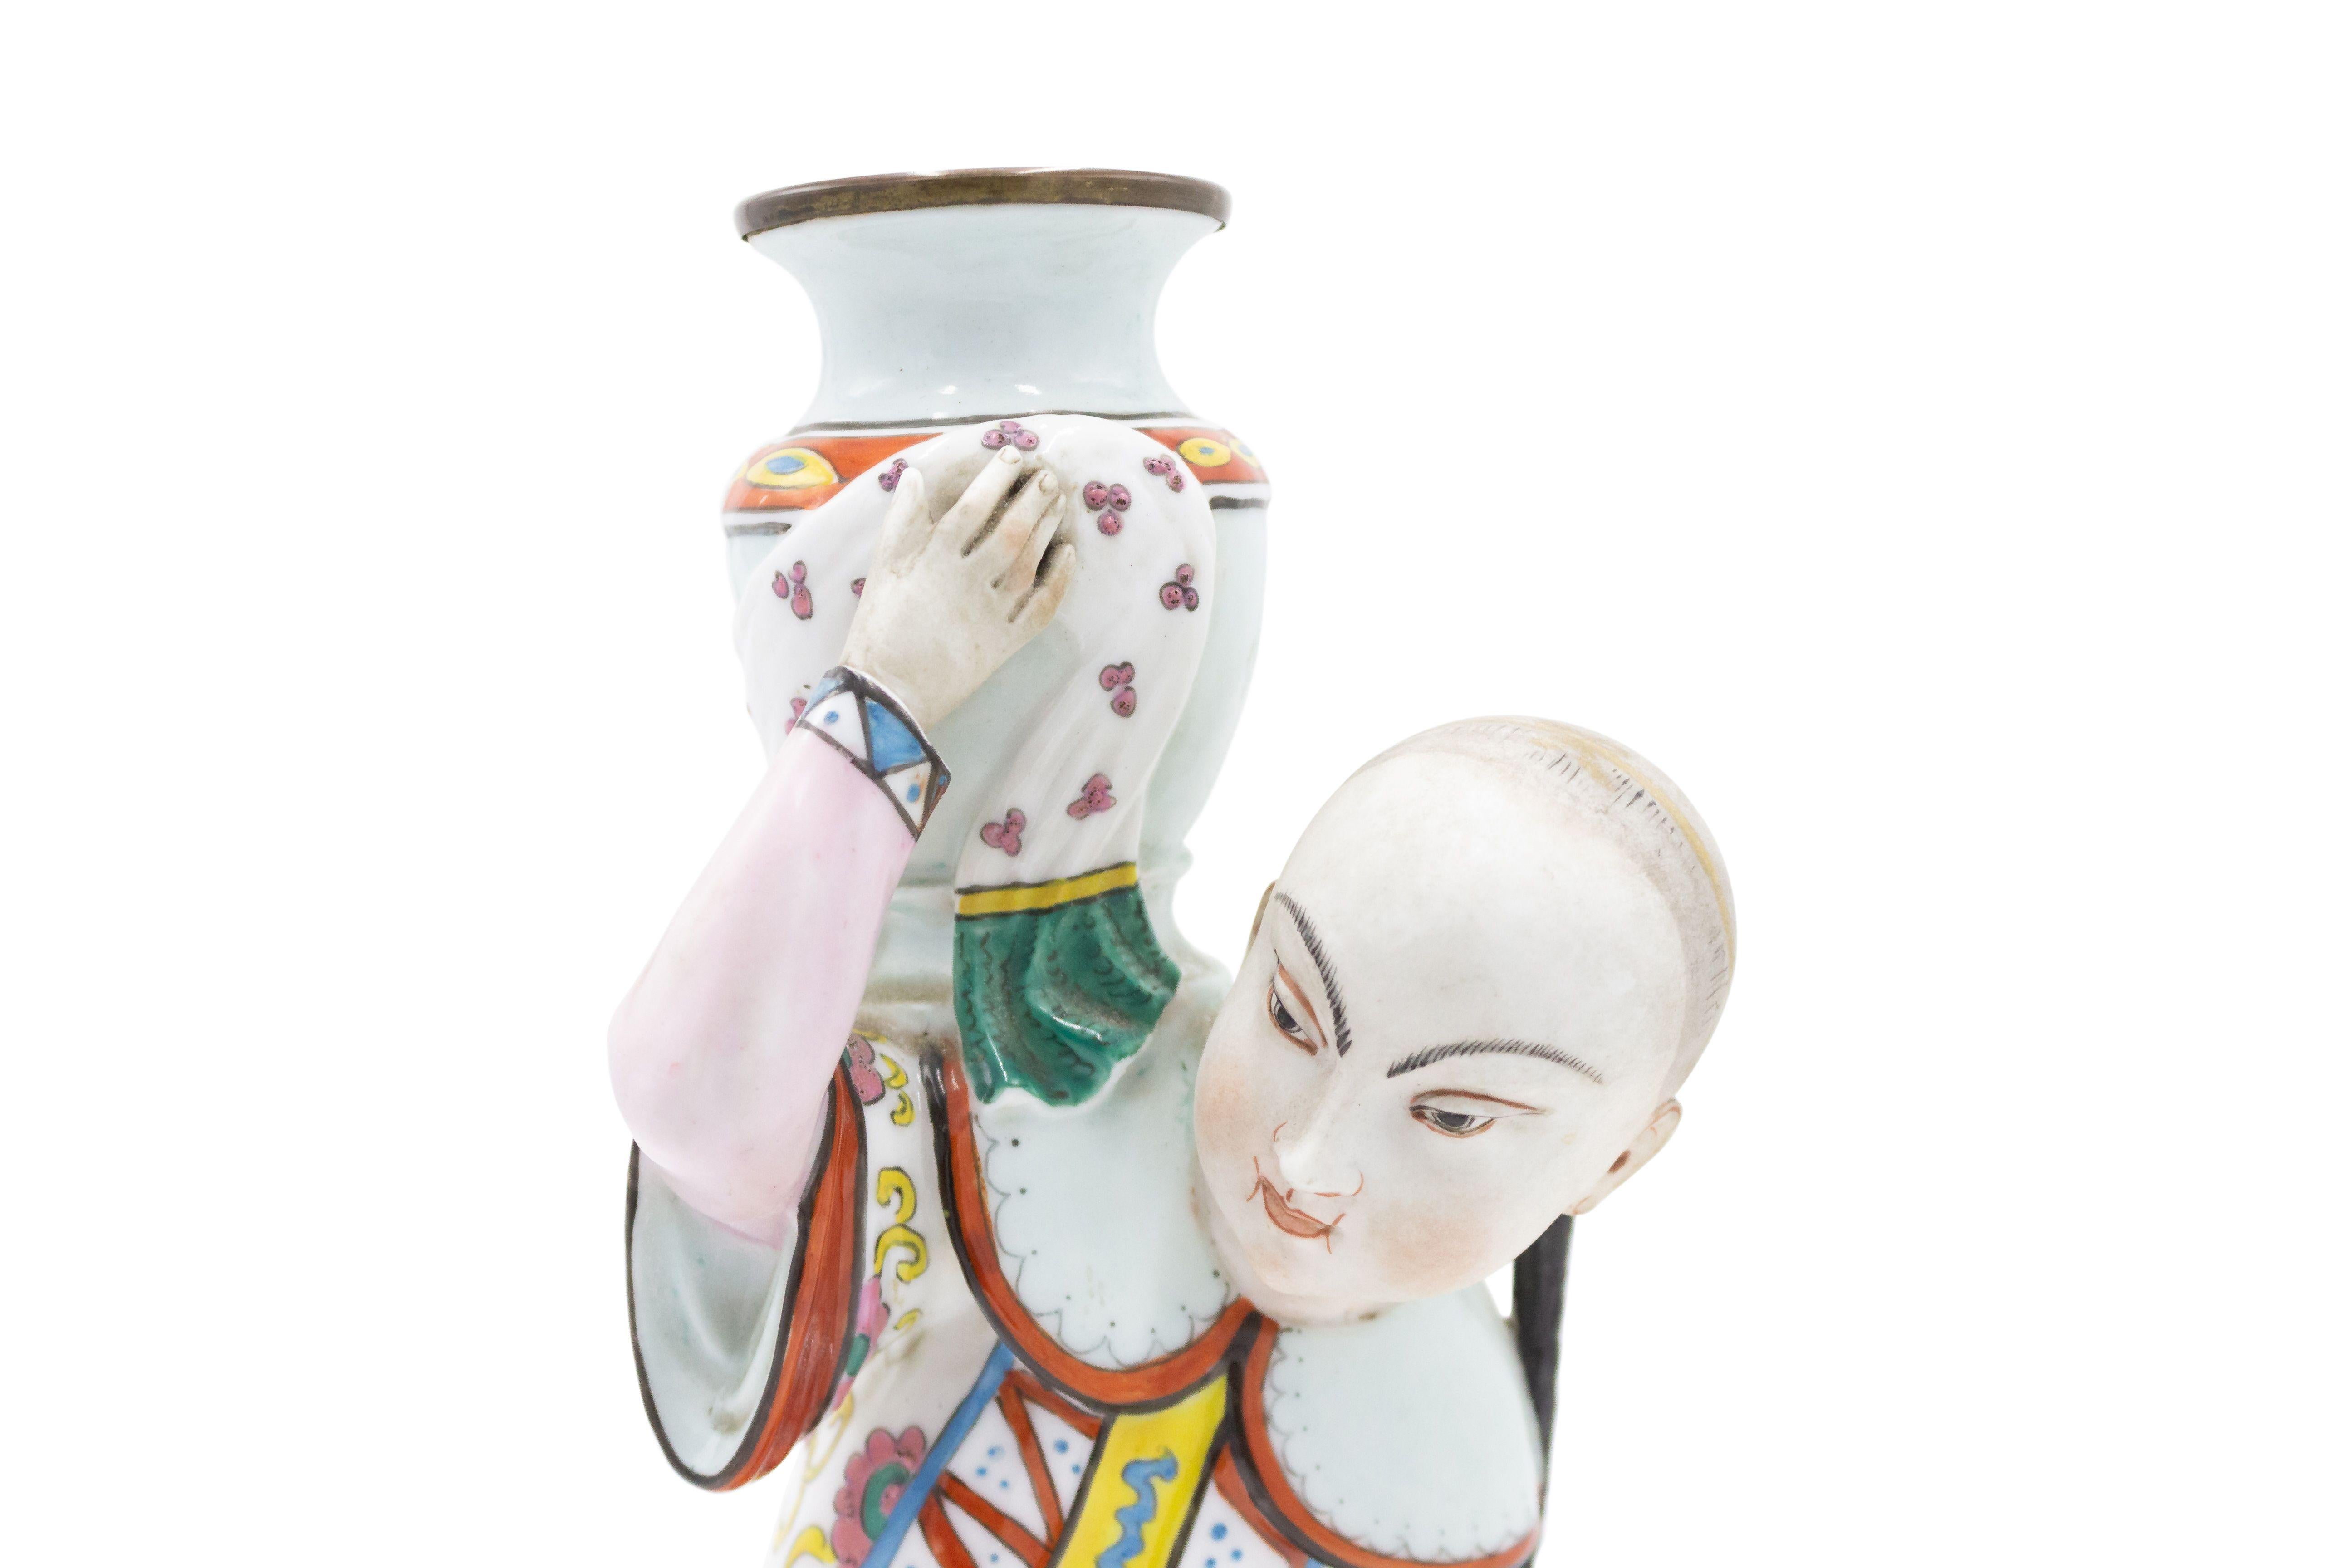 English Regency-style (Late 19th Century) ormolu mounted porcelain candlestick (one) in the form of kneeling Chinese figures holding an urn.
 